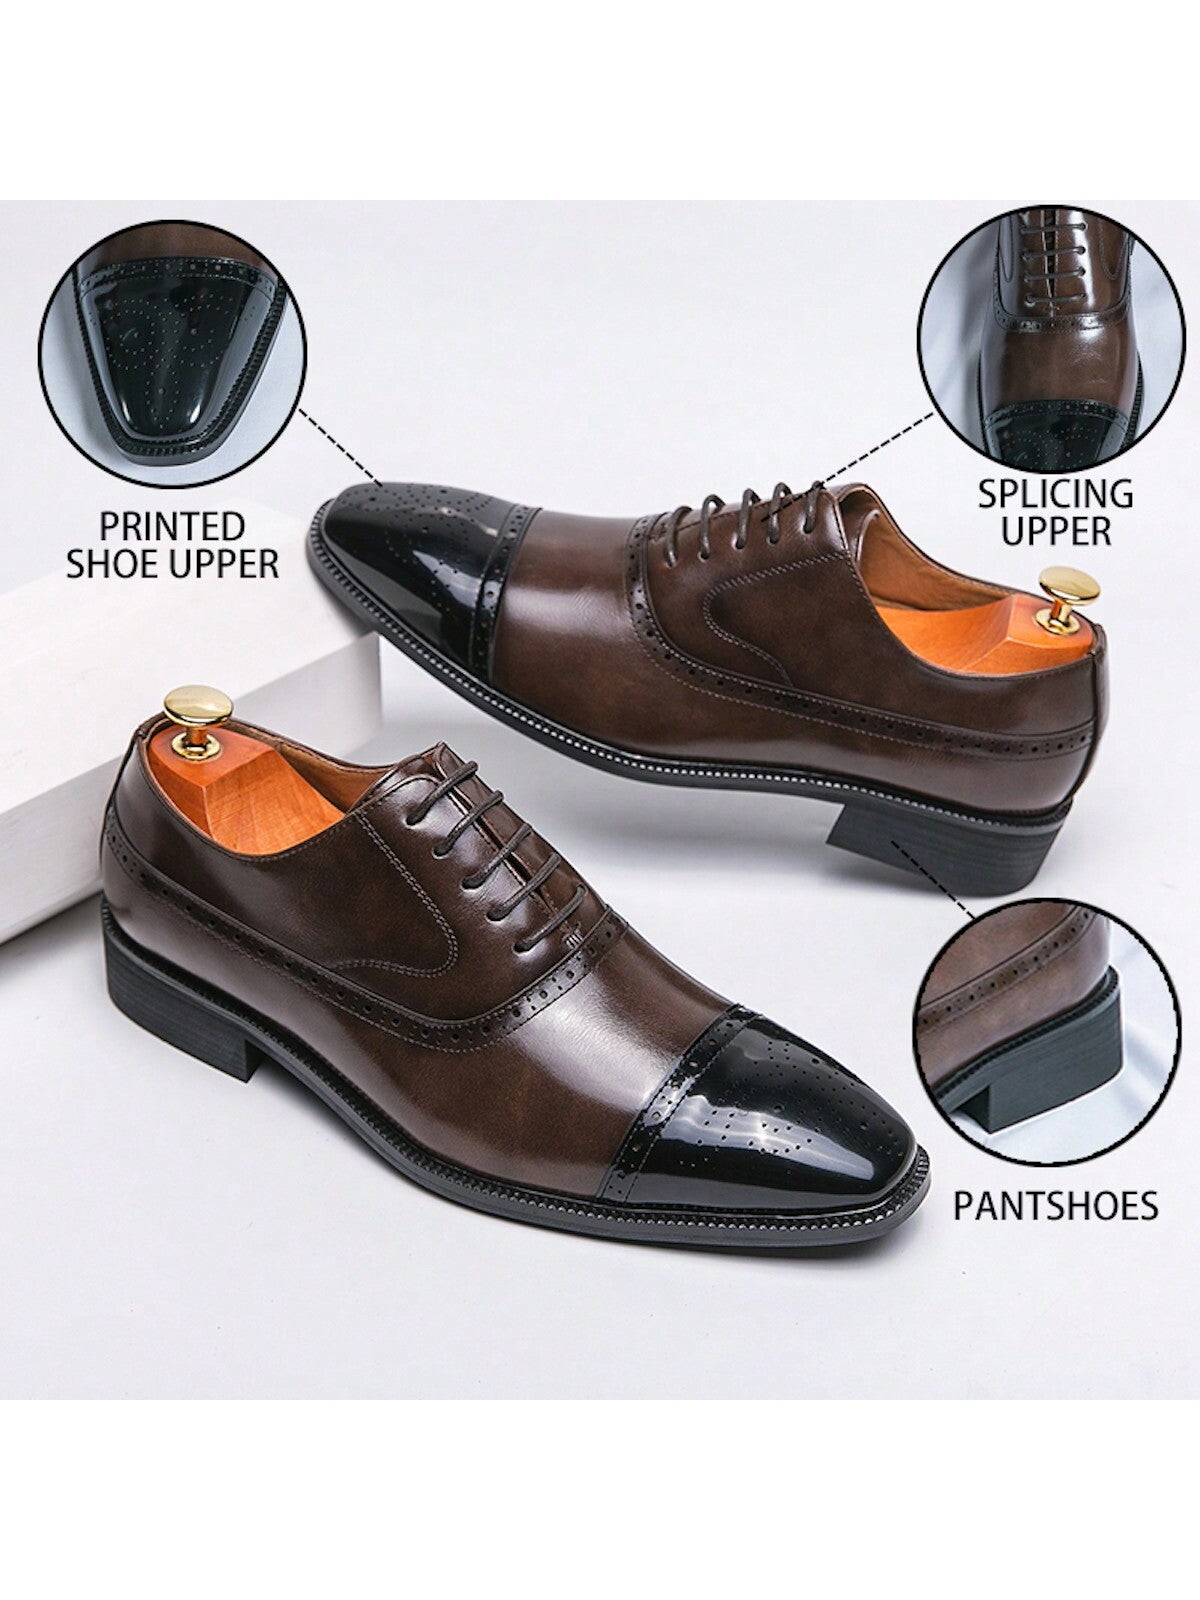 Men's Two Tone Classic Oxford Shoes With Pointed Toe, Lace-Up Closure, Brogue Detailing, Business Casual Dress Shoes, Suitable For Dance Party And Various Occasions